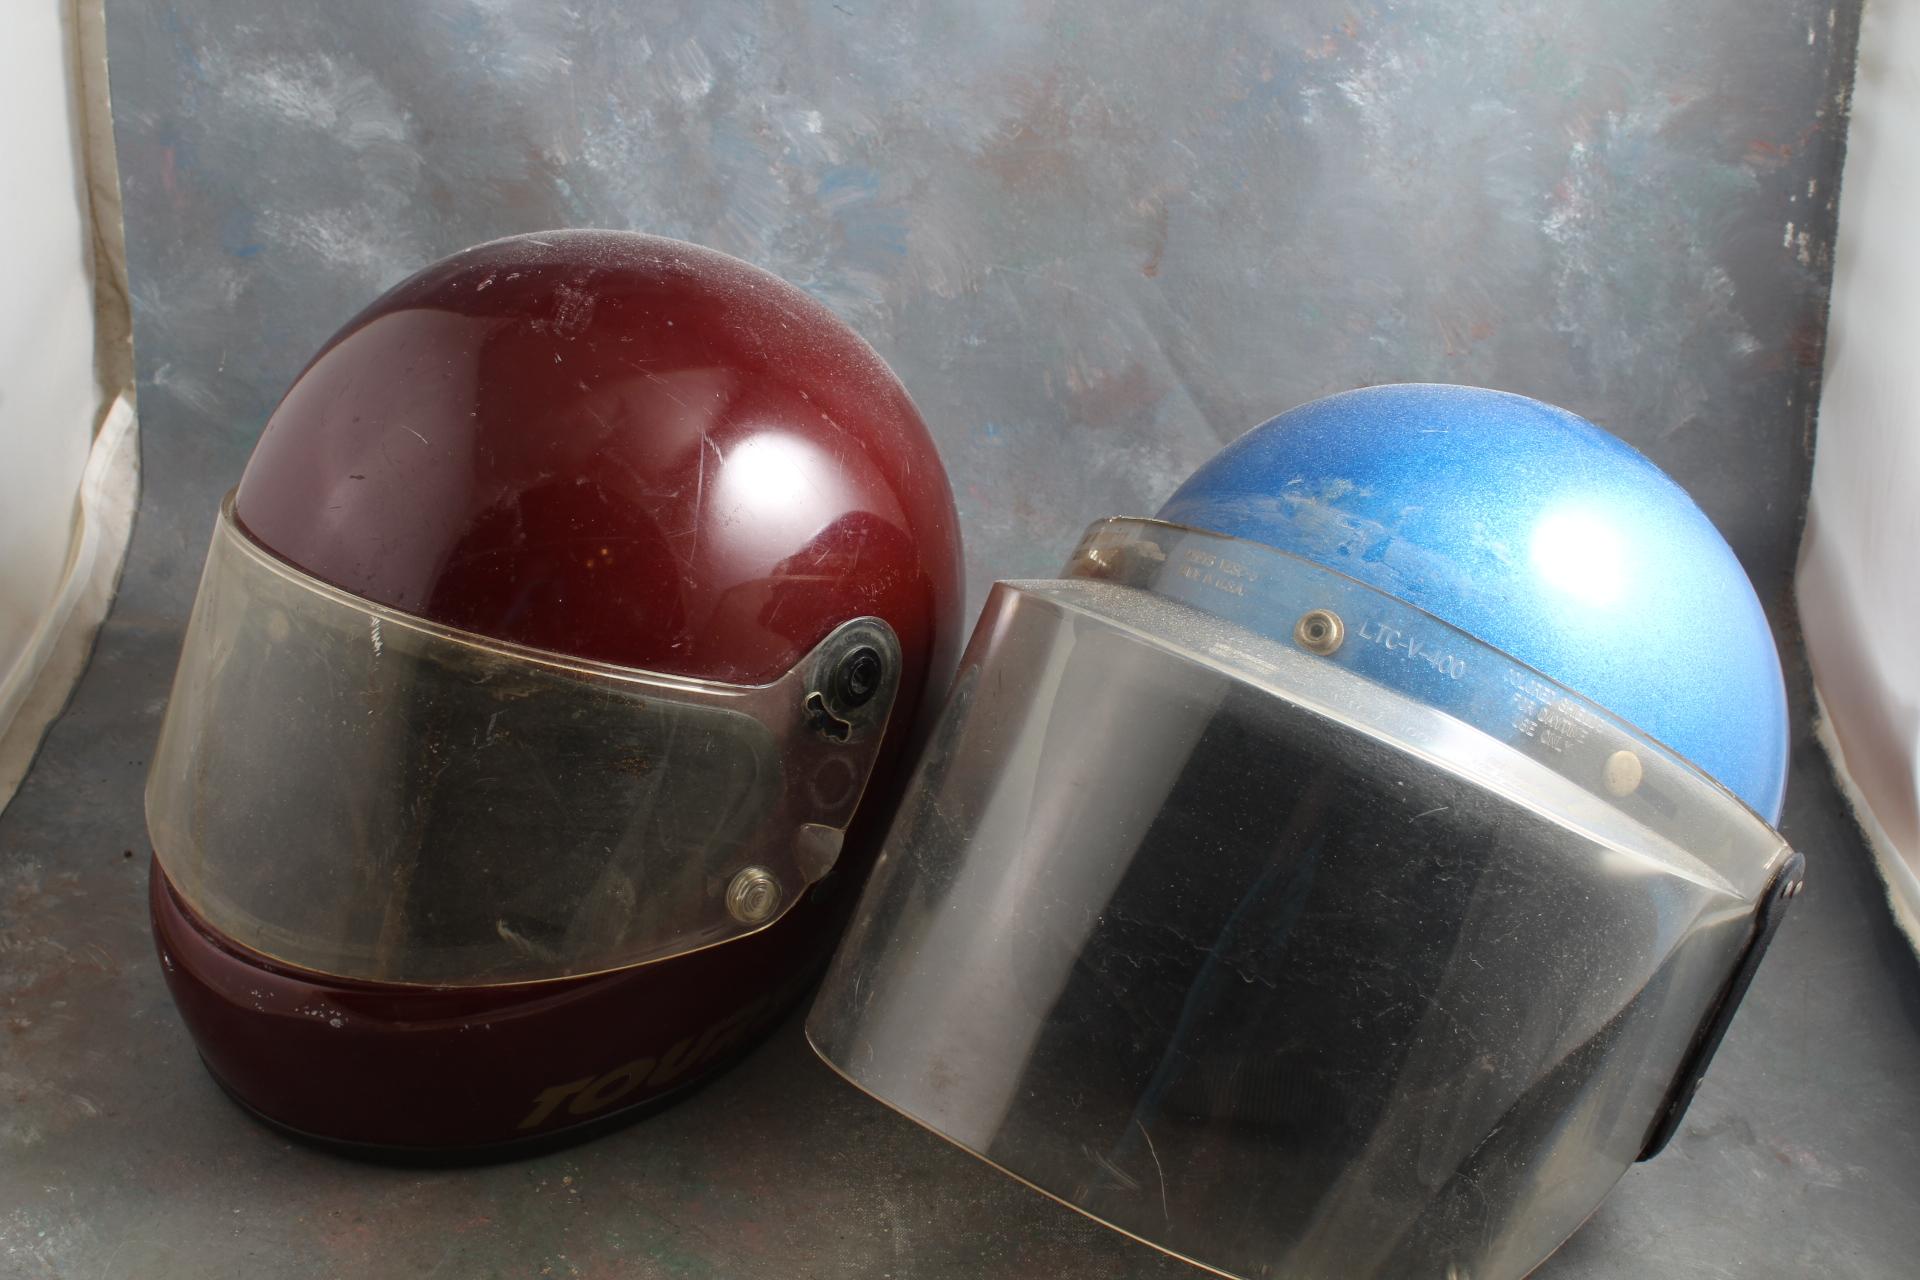 2 Vintage Motorcycle Helmets 1 is Blue Sparkle & 1 Bell Tour Star Size 7 1/8"